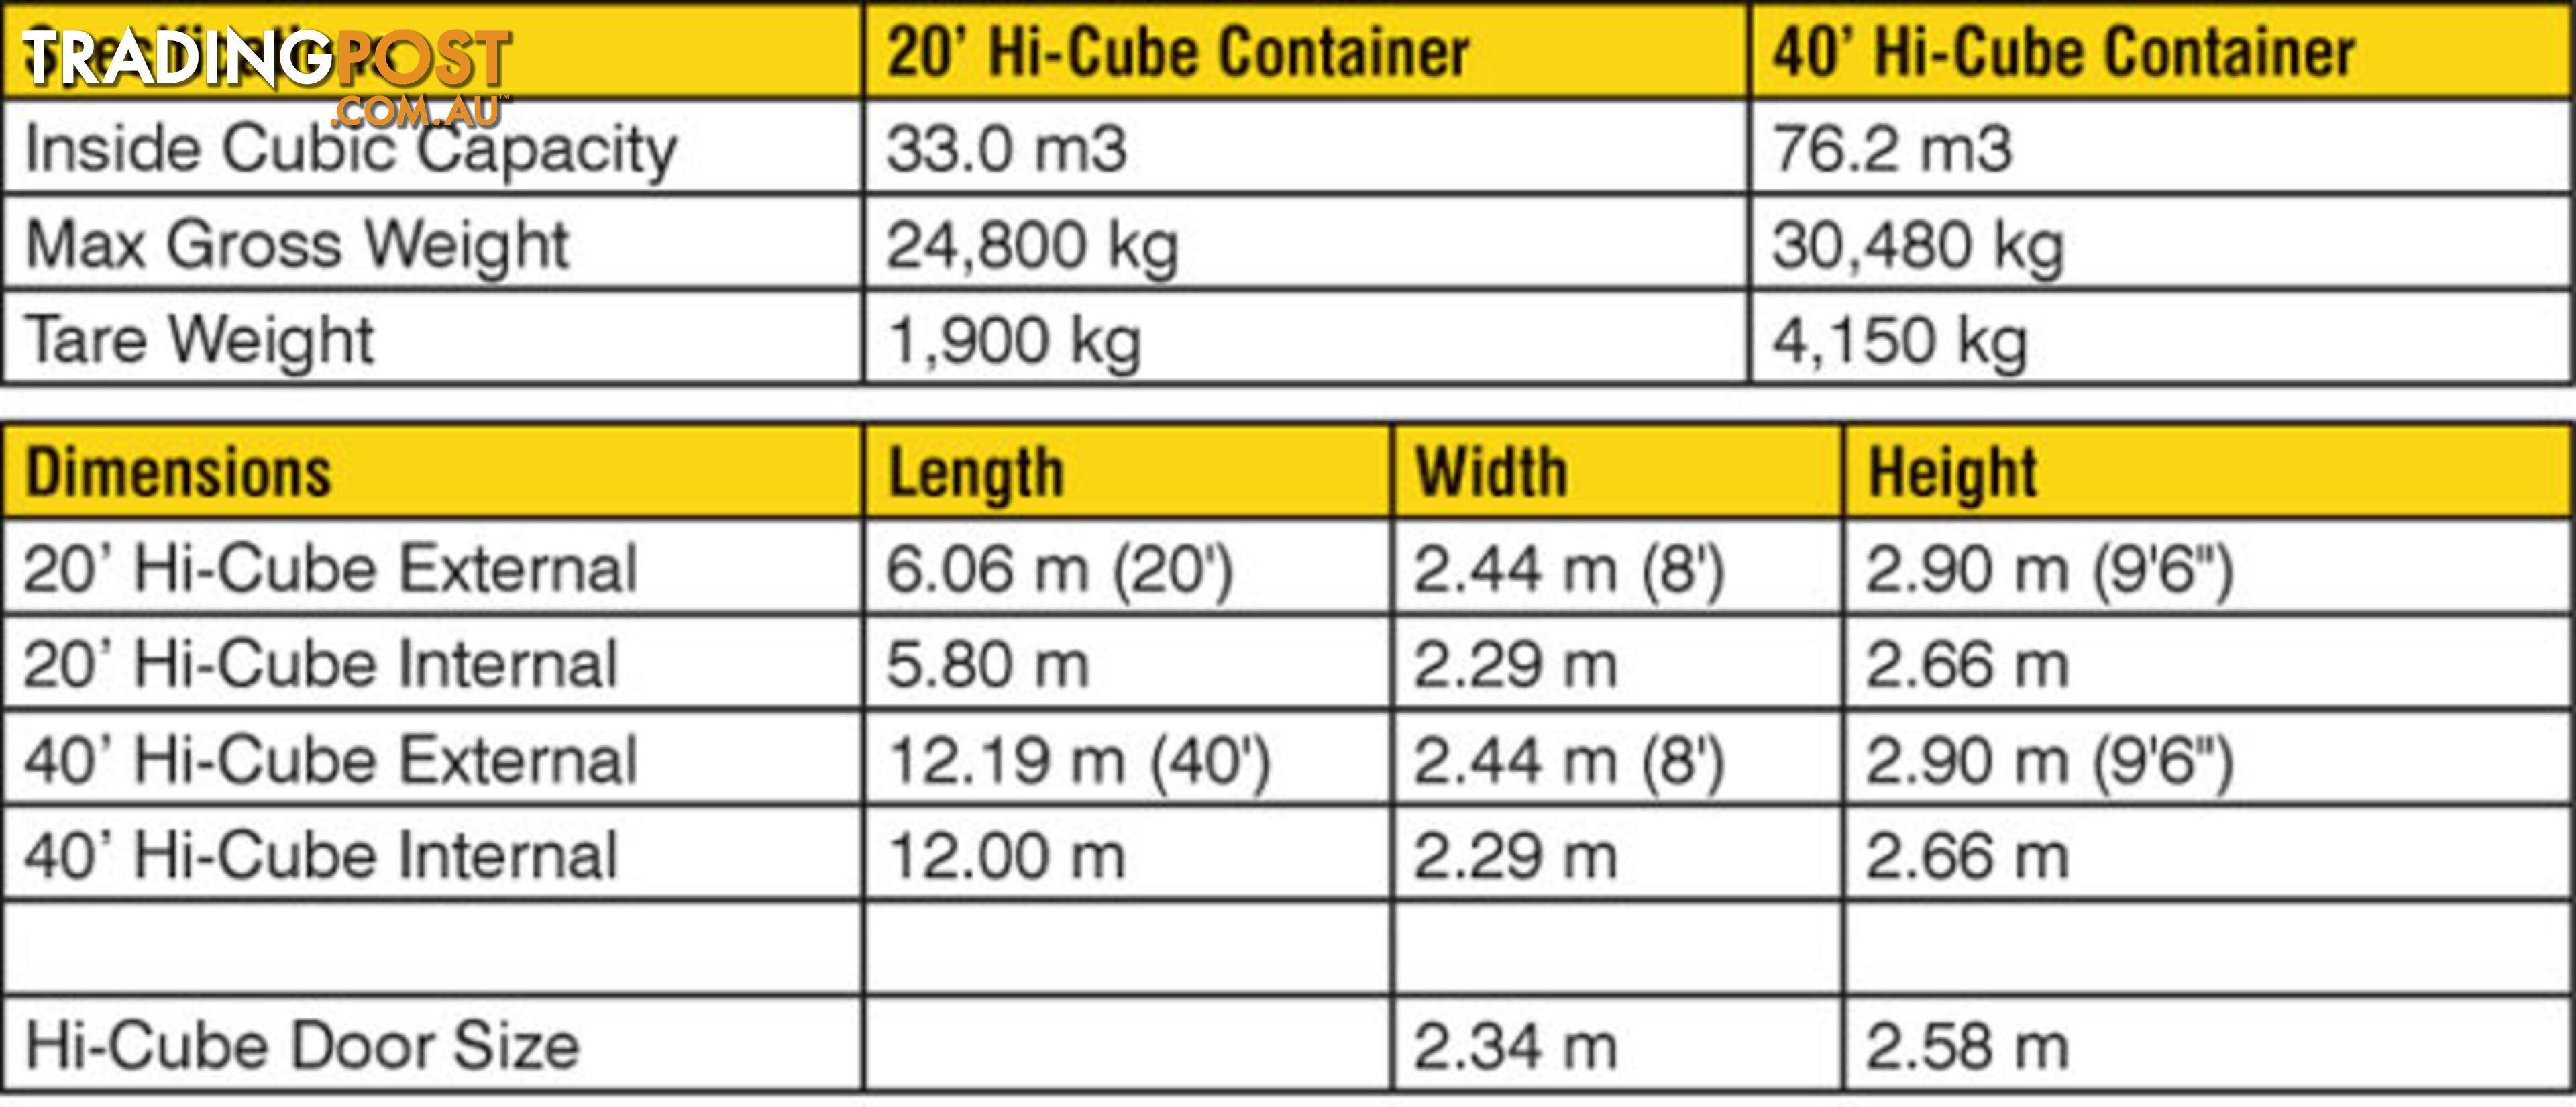 New 40ft High Cube Shipping Containers Port Pirie - From $7200 + GST